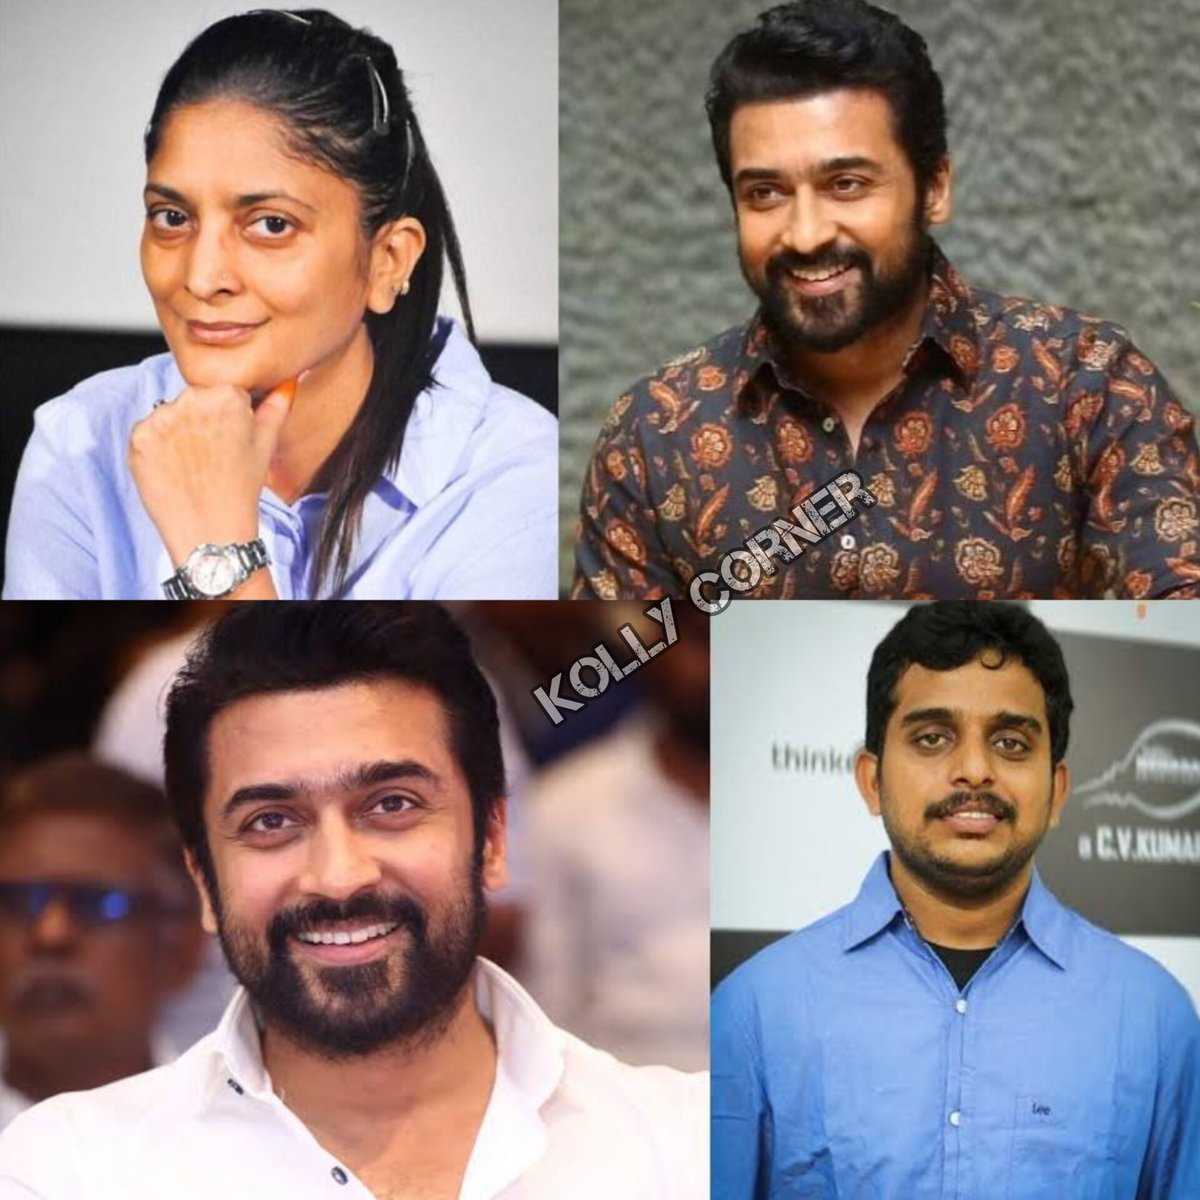 #Suriya43 Exclusive Buzz ✨

- As per recent reports, #Suriya & Director #Ravikumar project may take off before the #SudhaKongara's project due the commitment with DWP 😯

- Since #Suriya43 is produced by his own 2D entertainment there is no issues to switch 🤔

- Expecting